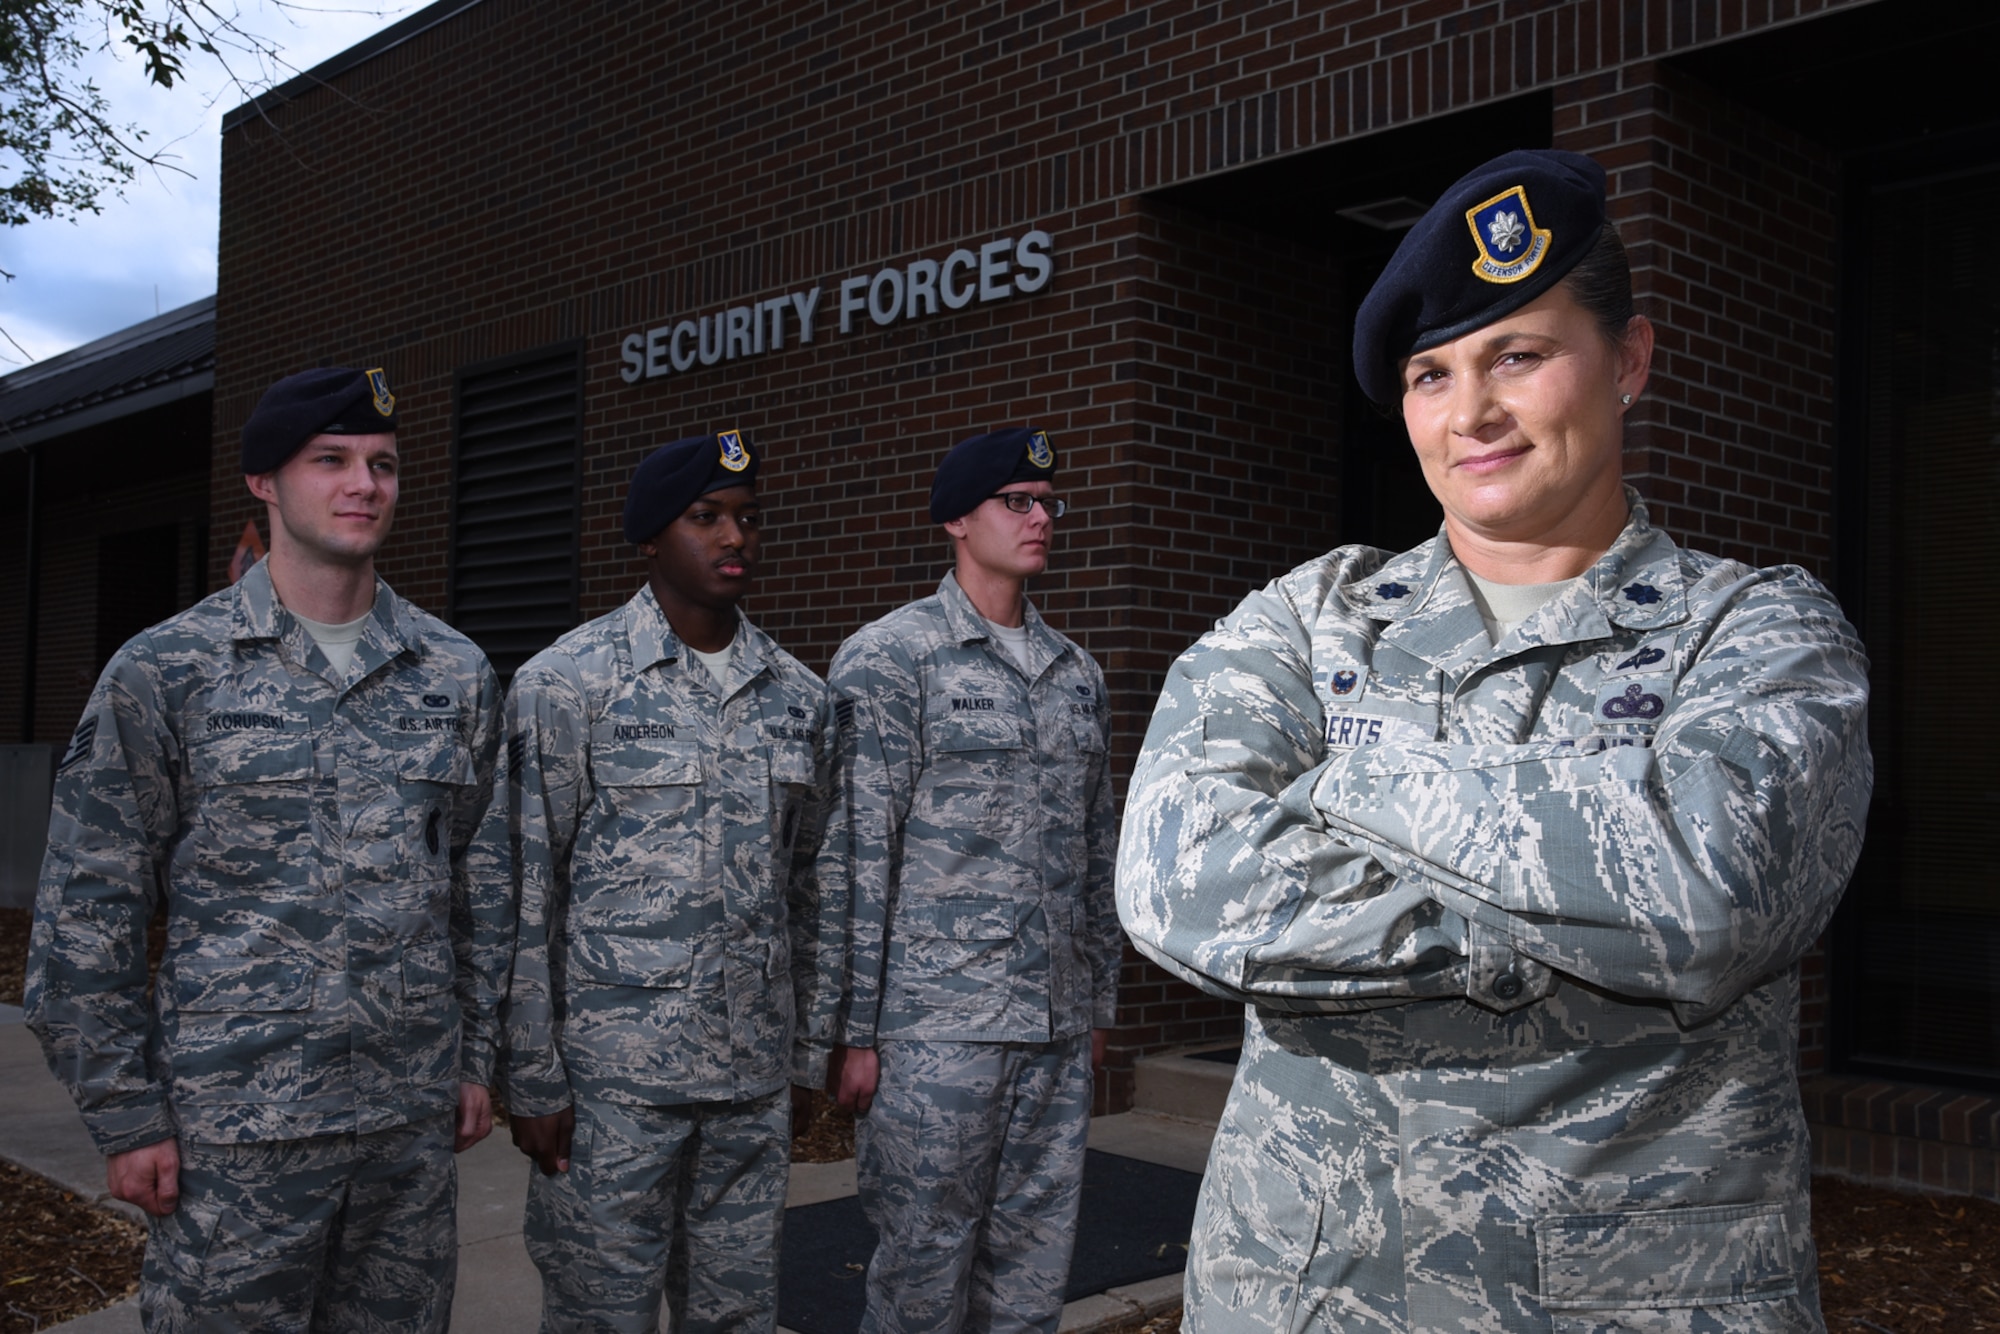 Lt. Col. Nicole Roberts, 21st Security Forces Squadron commander, relies on a personable leadership style she still uses today to effectively lead her 214 Airmen at Peterson Air Force Base, Colo. Roberts is affectionately known as “Mama Bear” around her squadron. (U.S. Air Force photo by Airman 1st Class Dennis Hoffman)